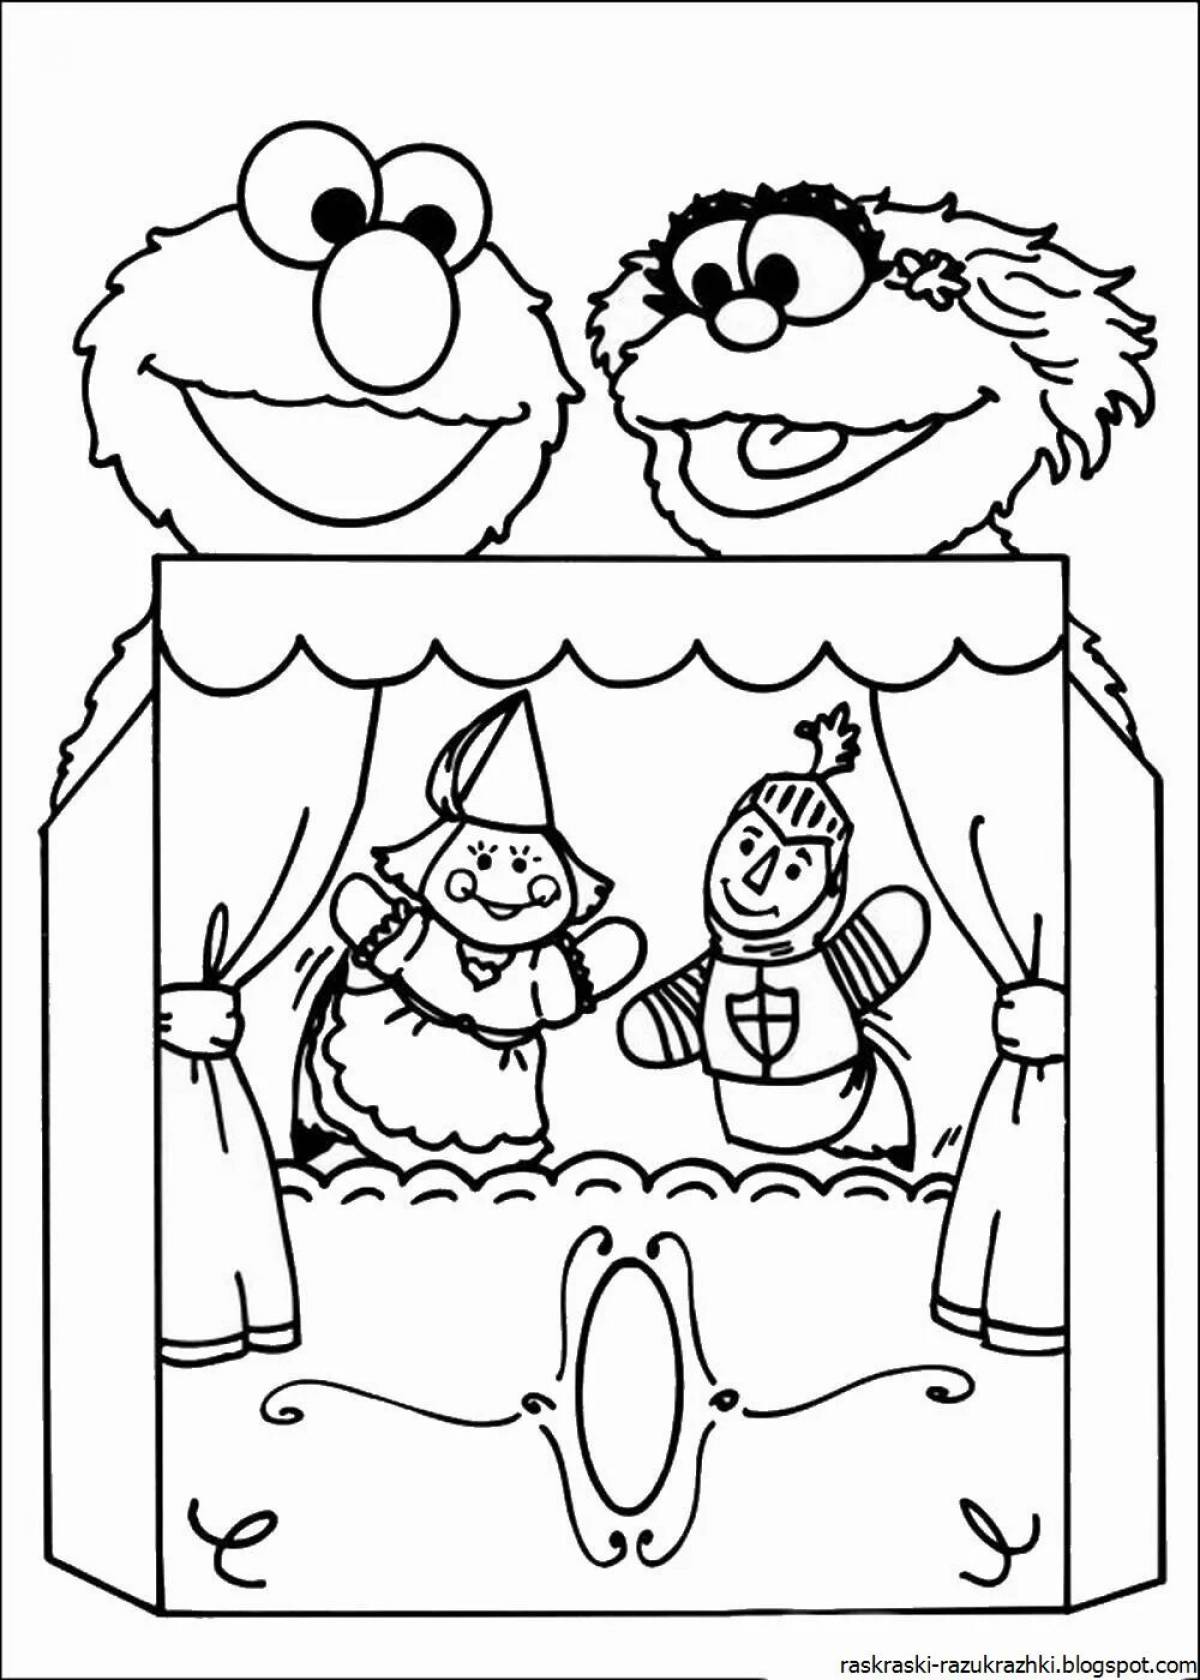 Attractive puppet theater coloring page